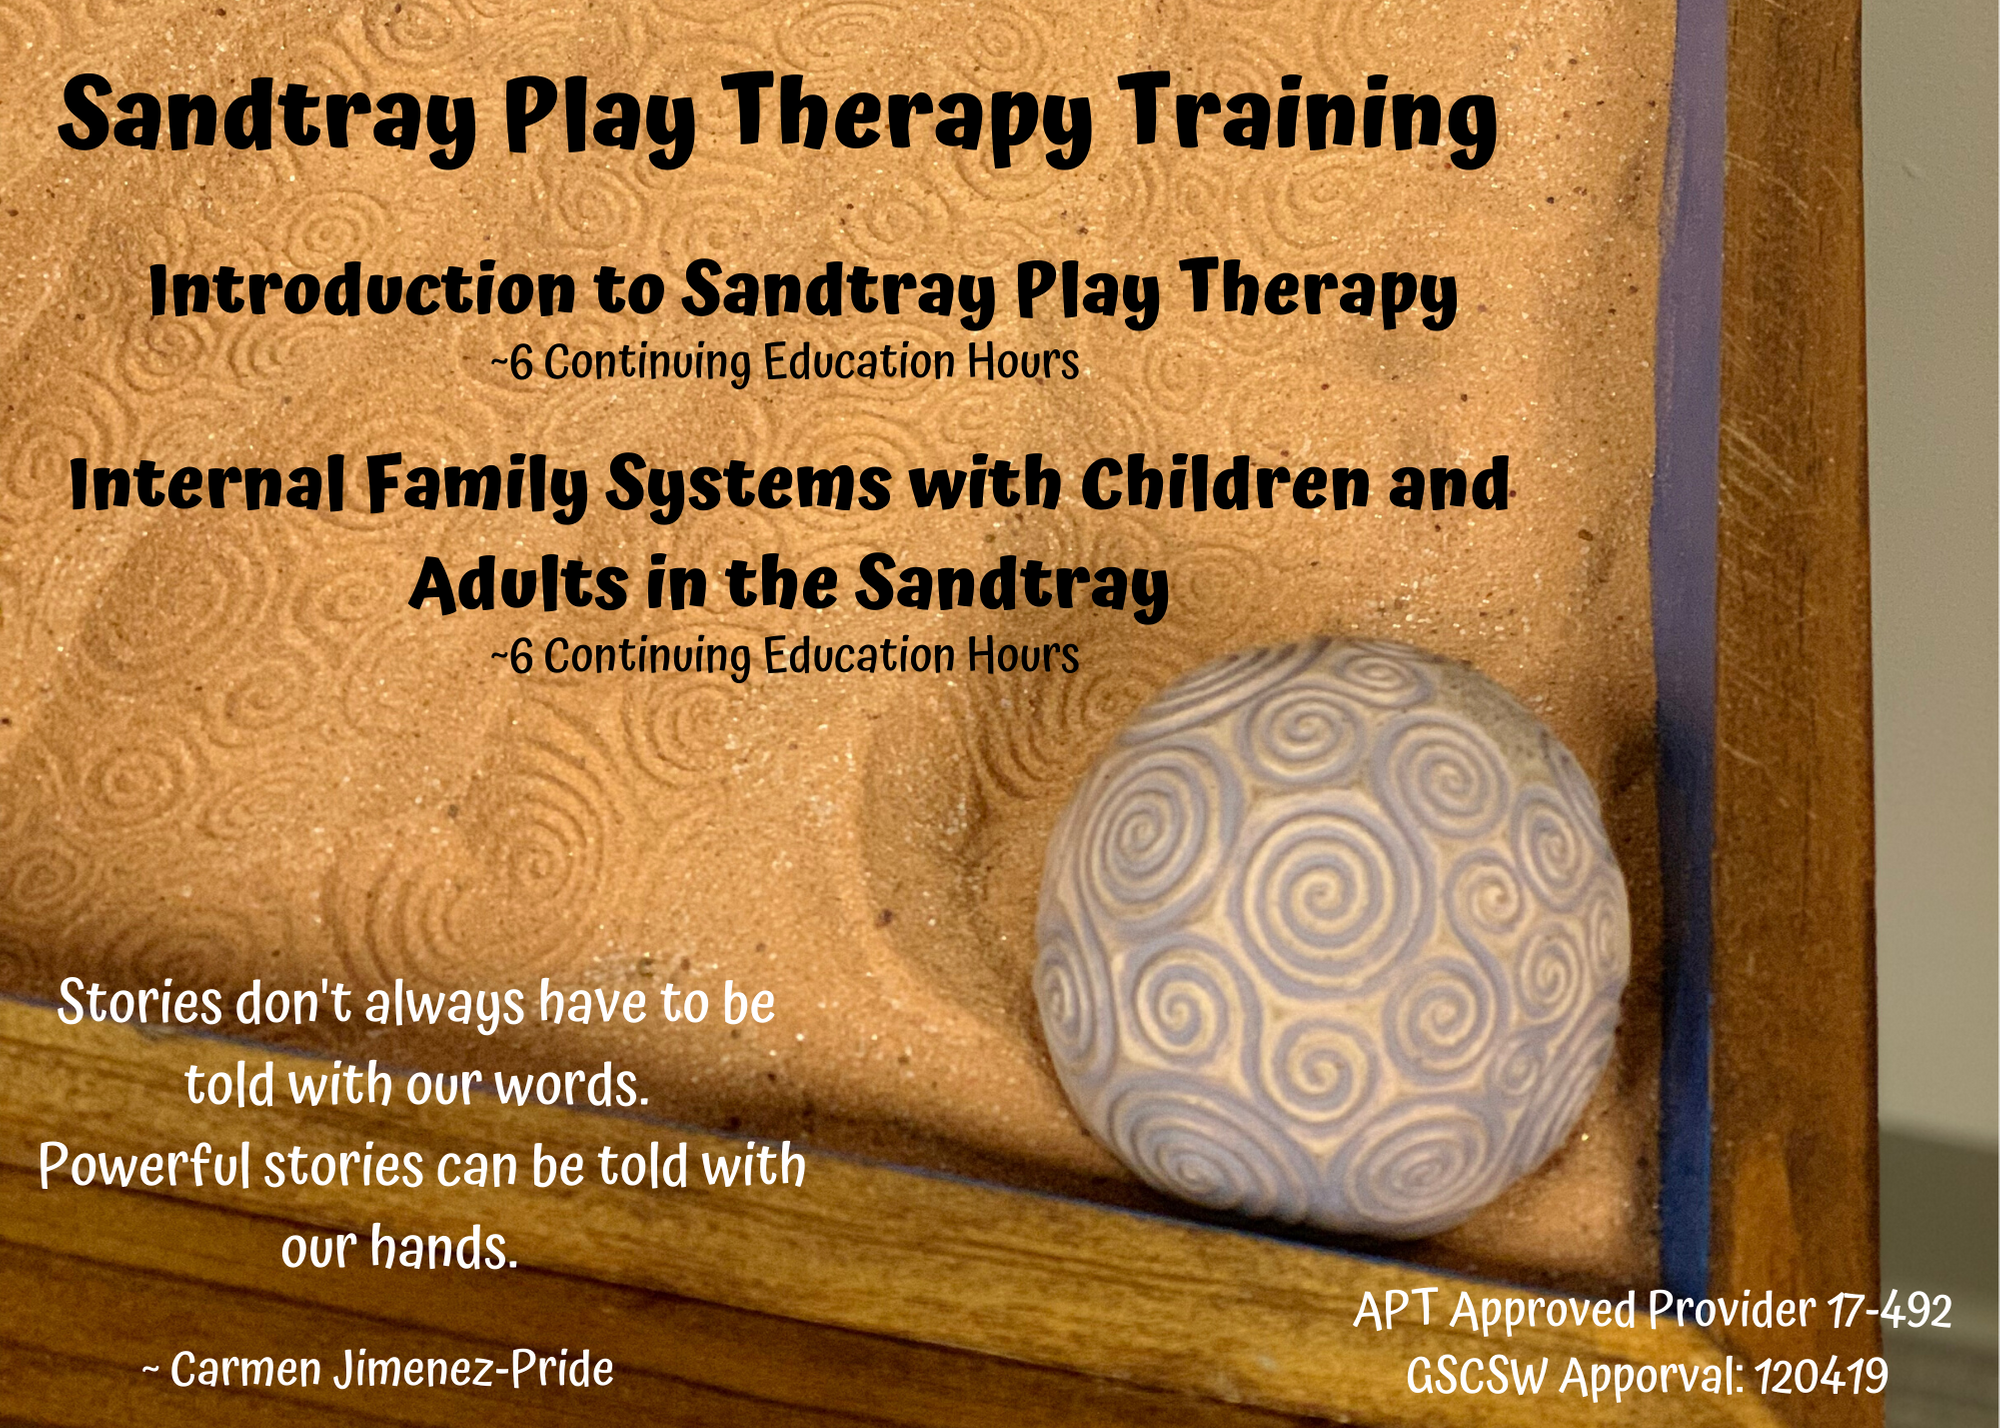 Sandtray Play Therapy Training